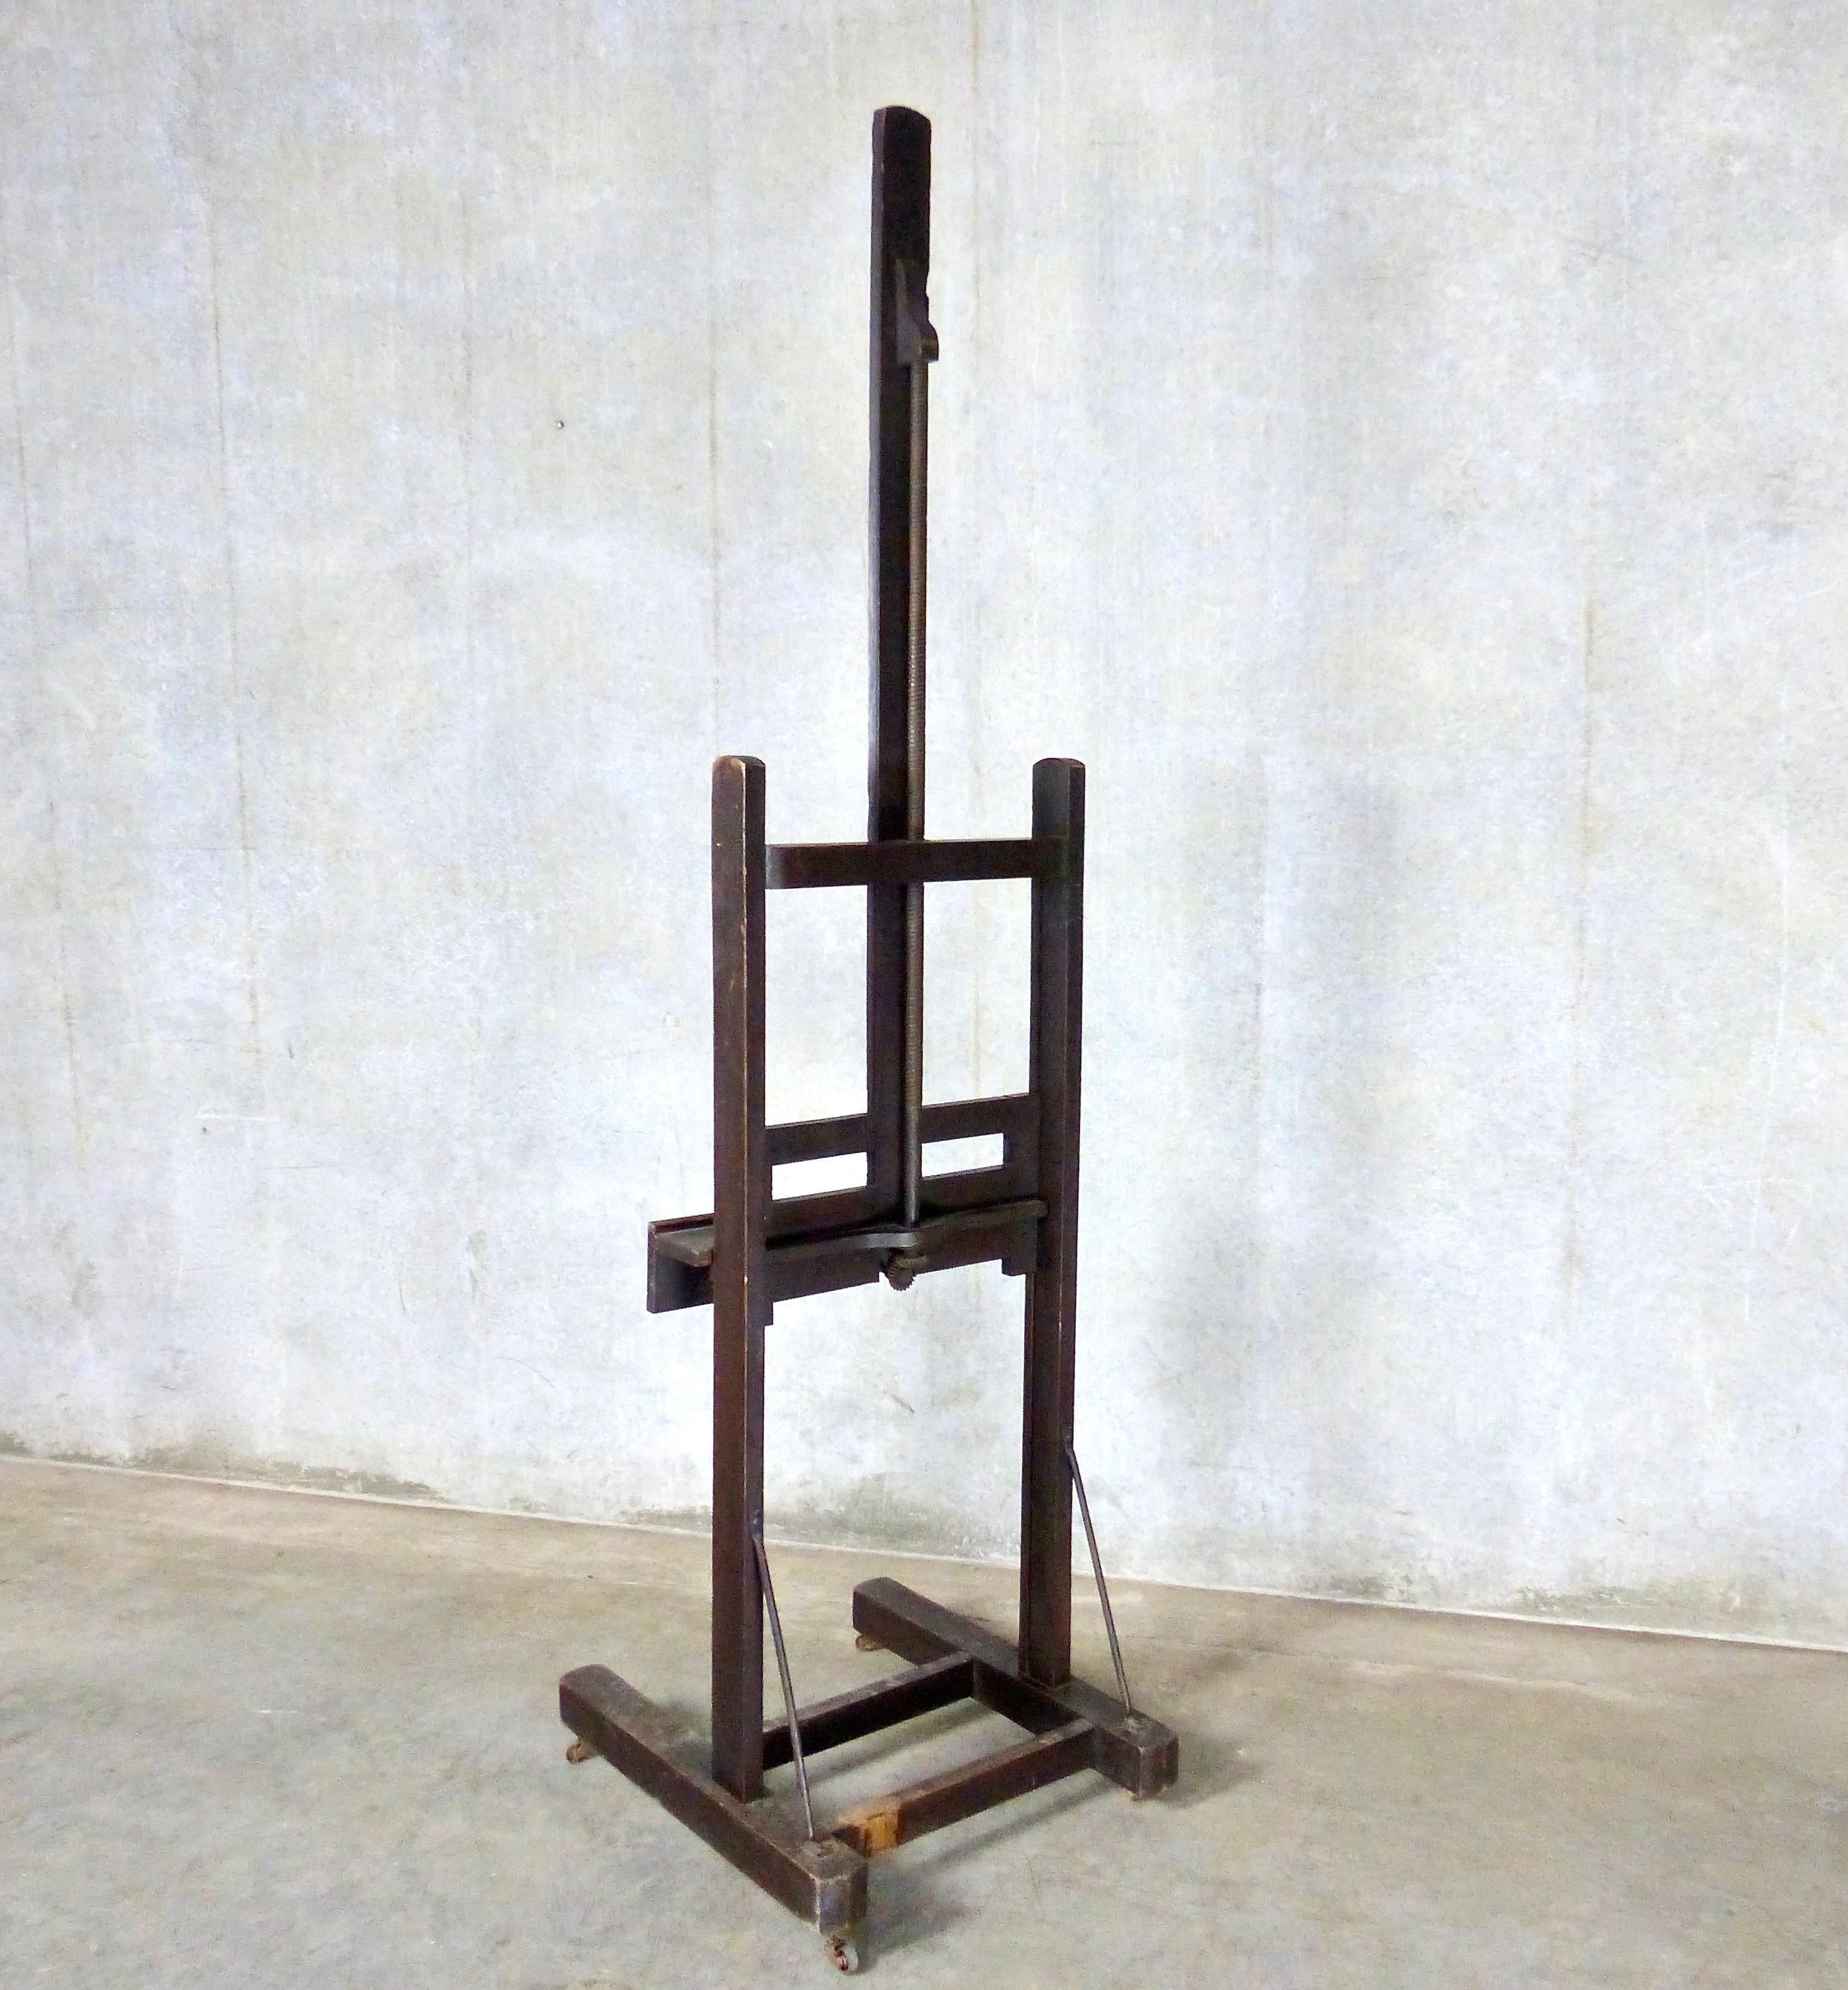 Early 20th Century French Artist’s Easel with Crank, circa 1900